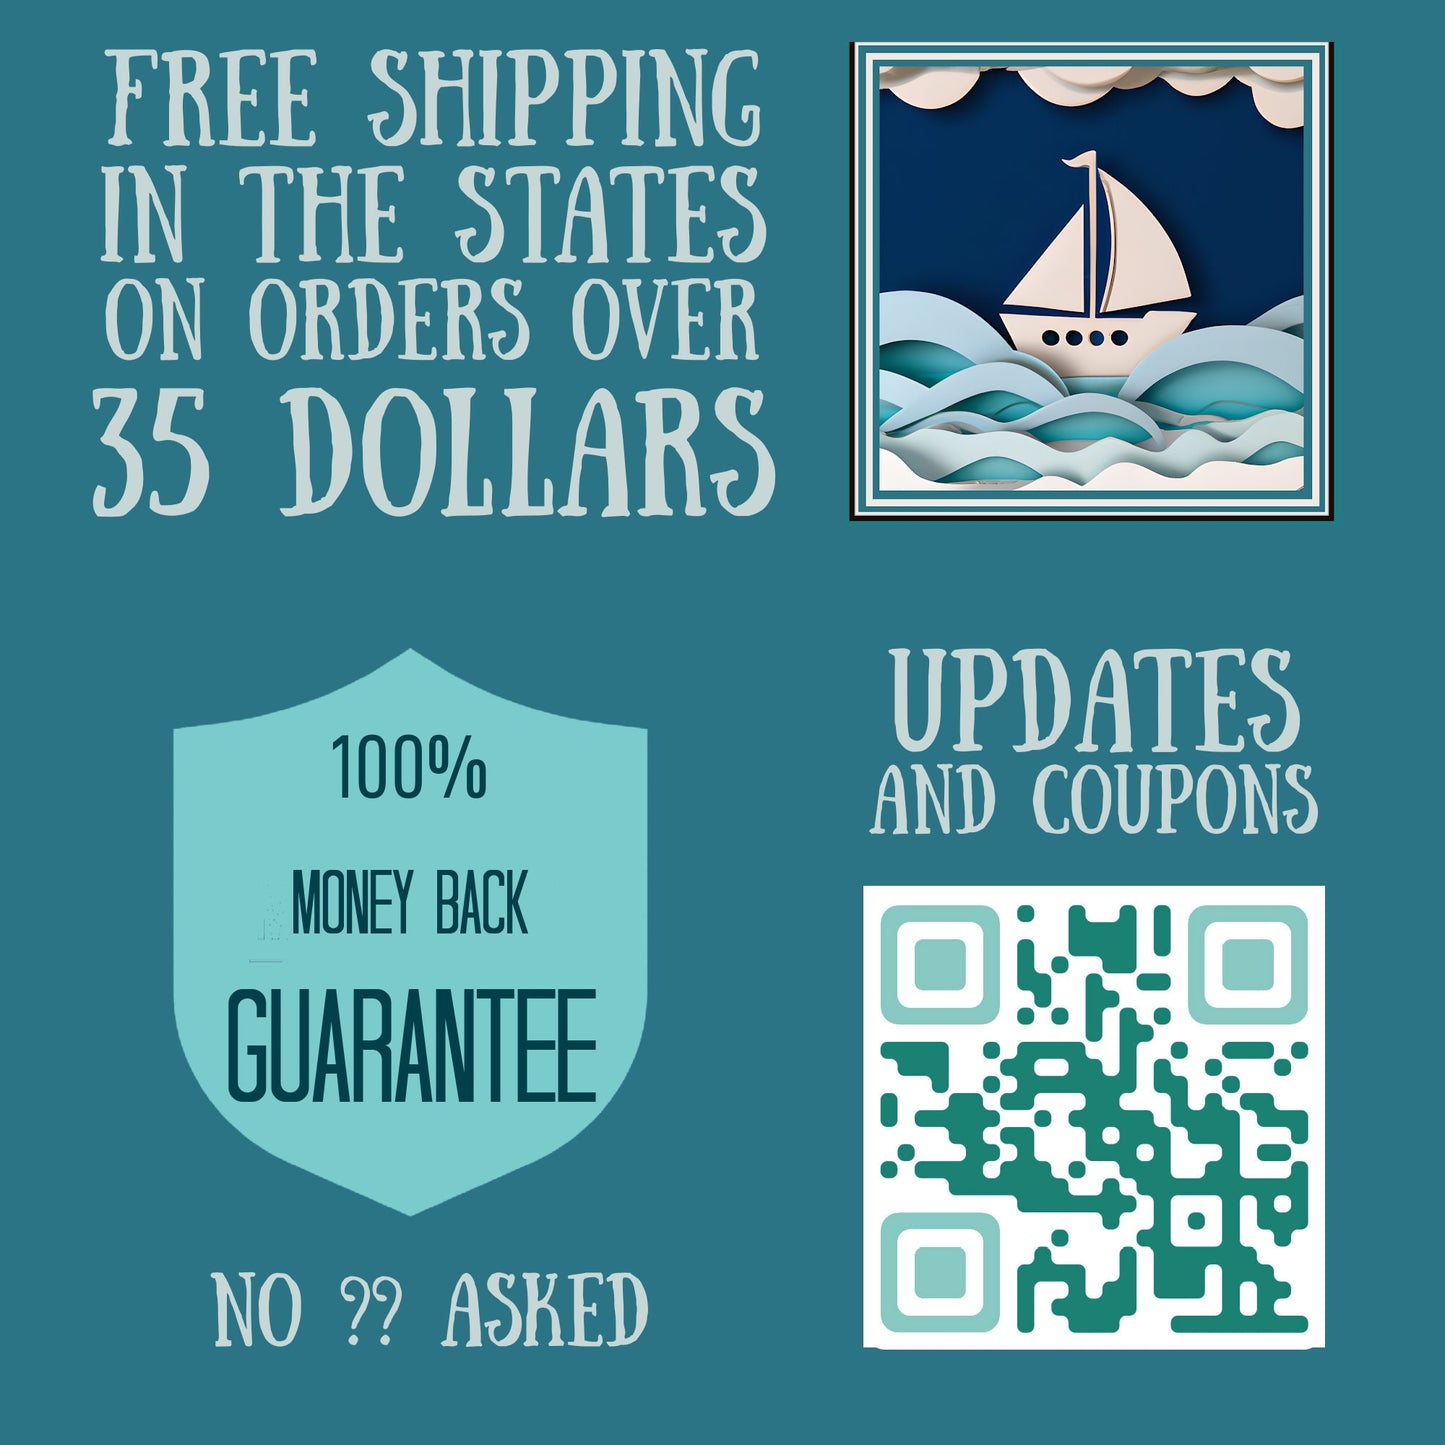 free shipping for orders over 35 dollars, money=back guarantee, and email updates